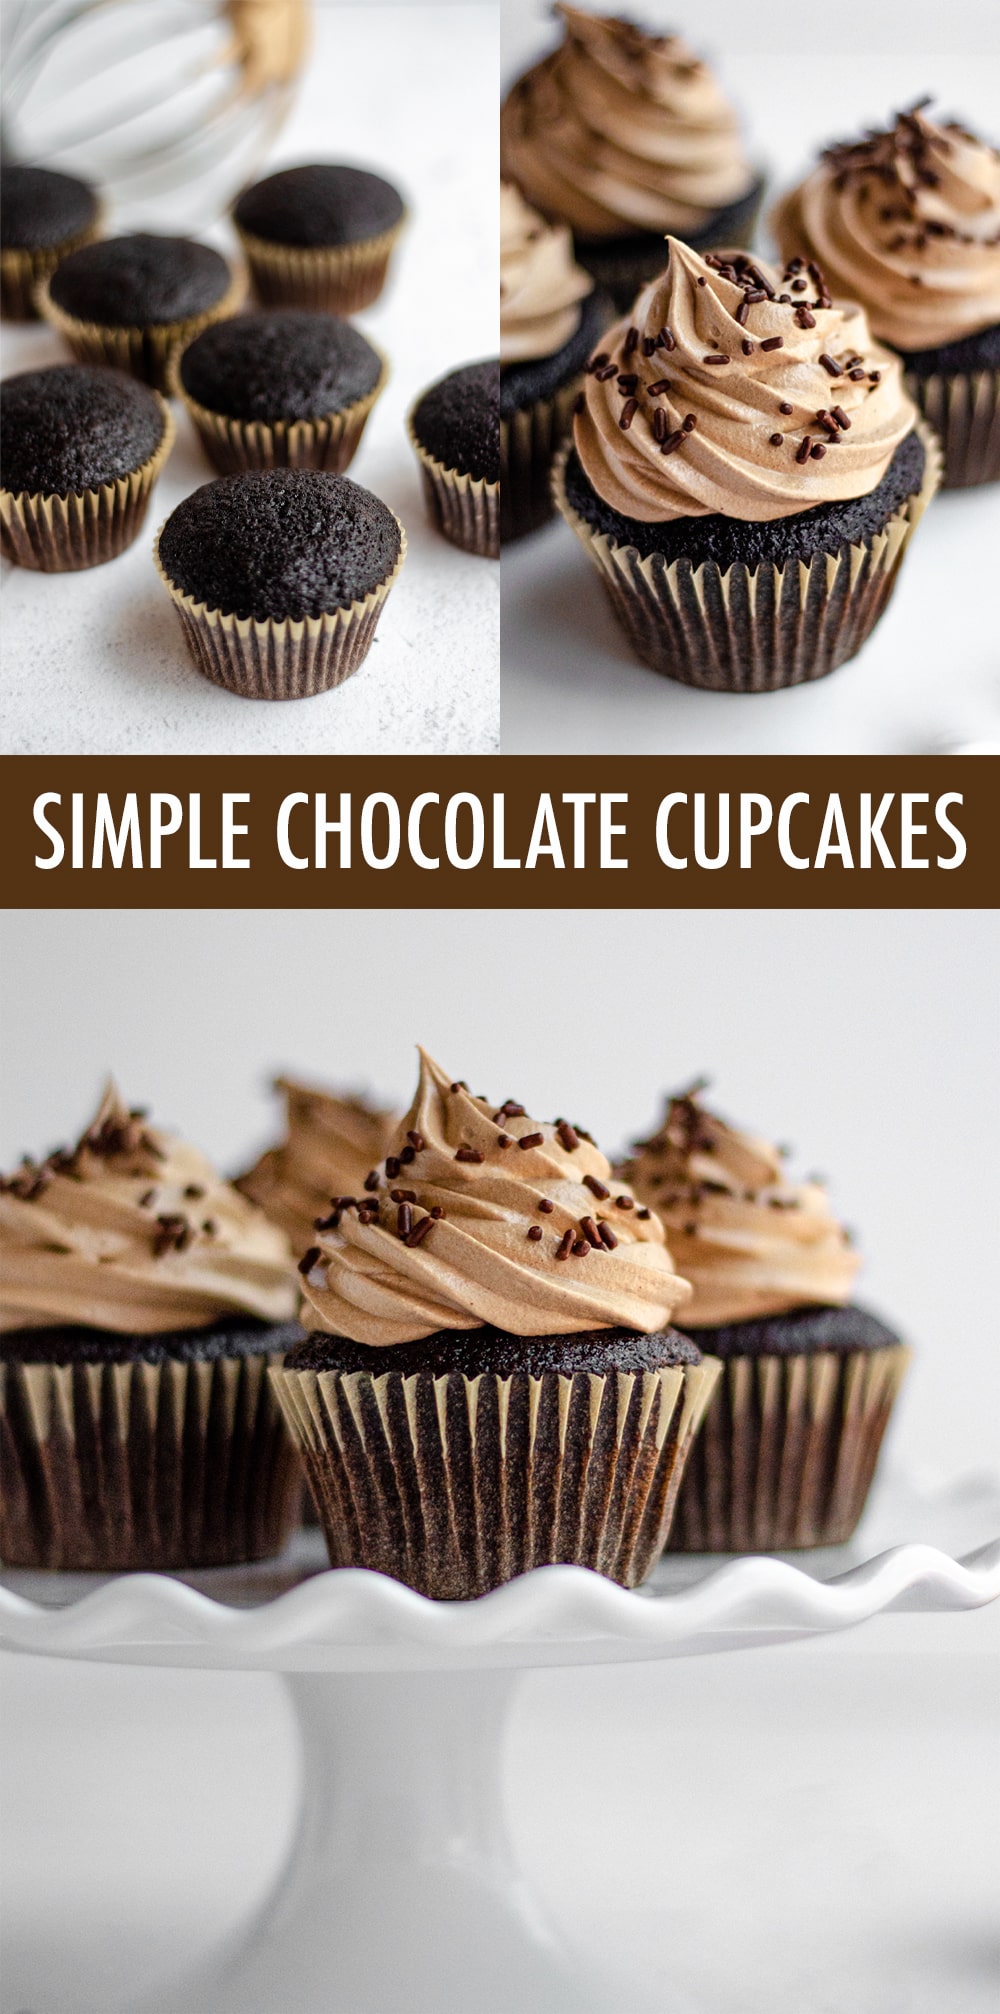 My go-to simple chocolate cupcakes are fluffy, moist, and don't even require a mixer. Top them with a velvety smooth chocolate Swiss meringue buttercream (or pair with another favorite) for a simple yet impressive little cupcake! via @frshaprilflours